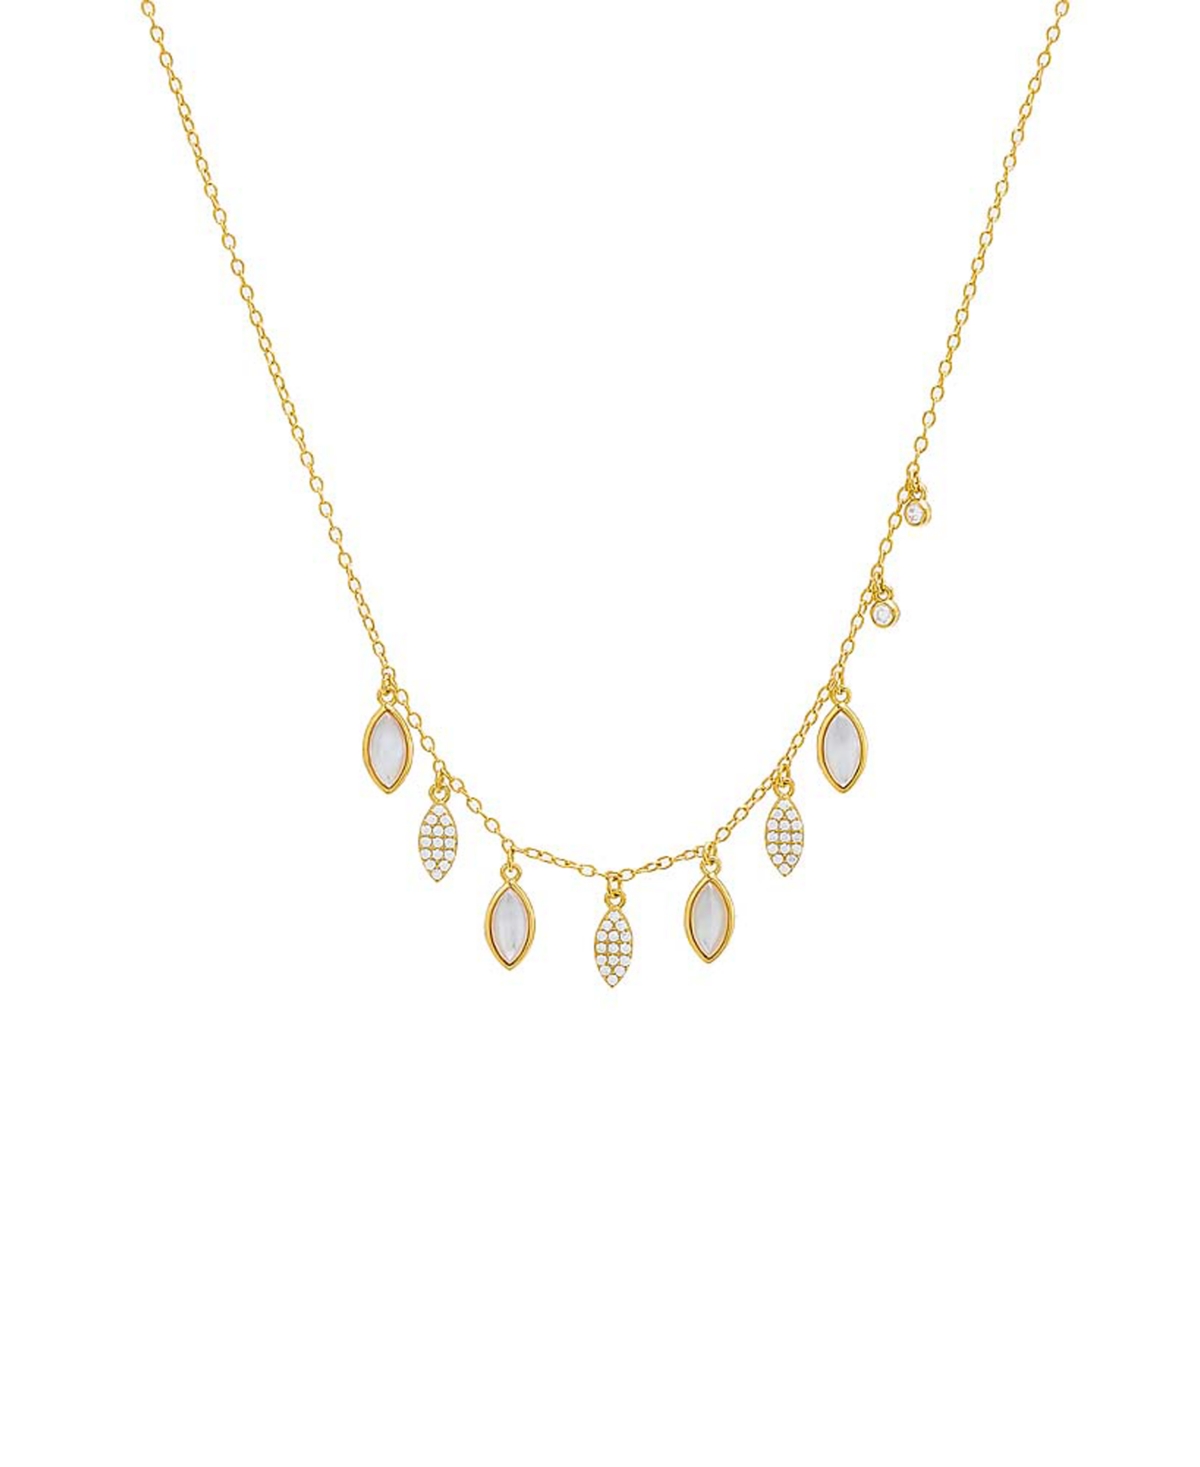 by Adina Eden 14k Gold-Plated Sterling Silver Cubic Zirconia & Stone Marquise Charm Statement Necklace, 16" + 2" extender